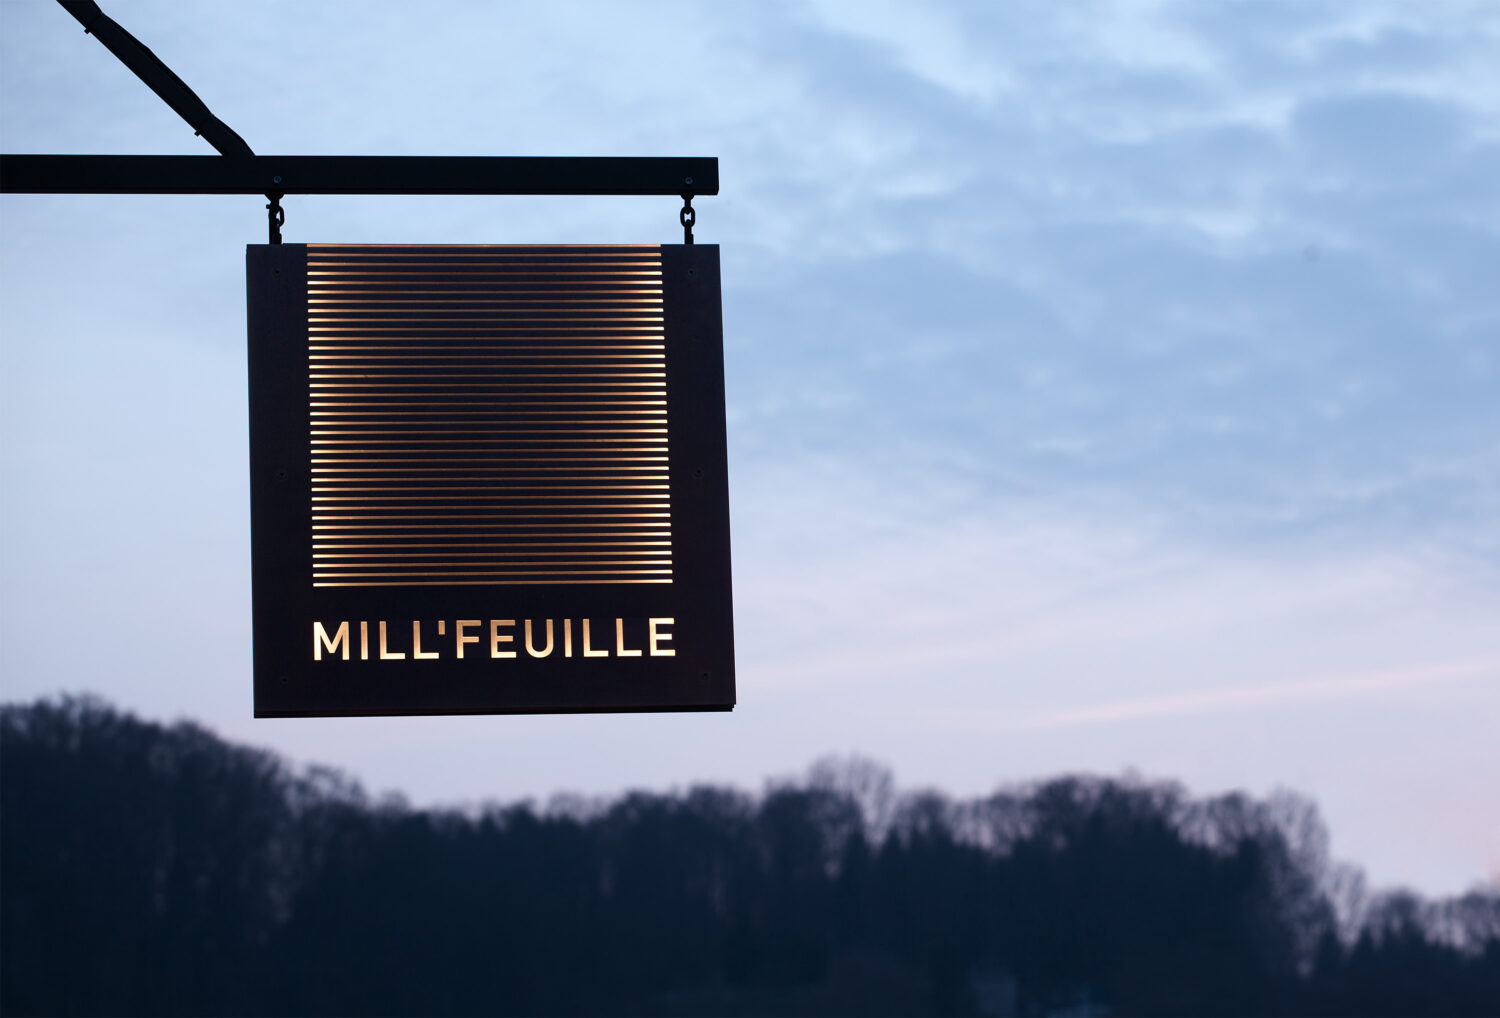 MILL’FEUILLE